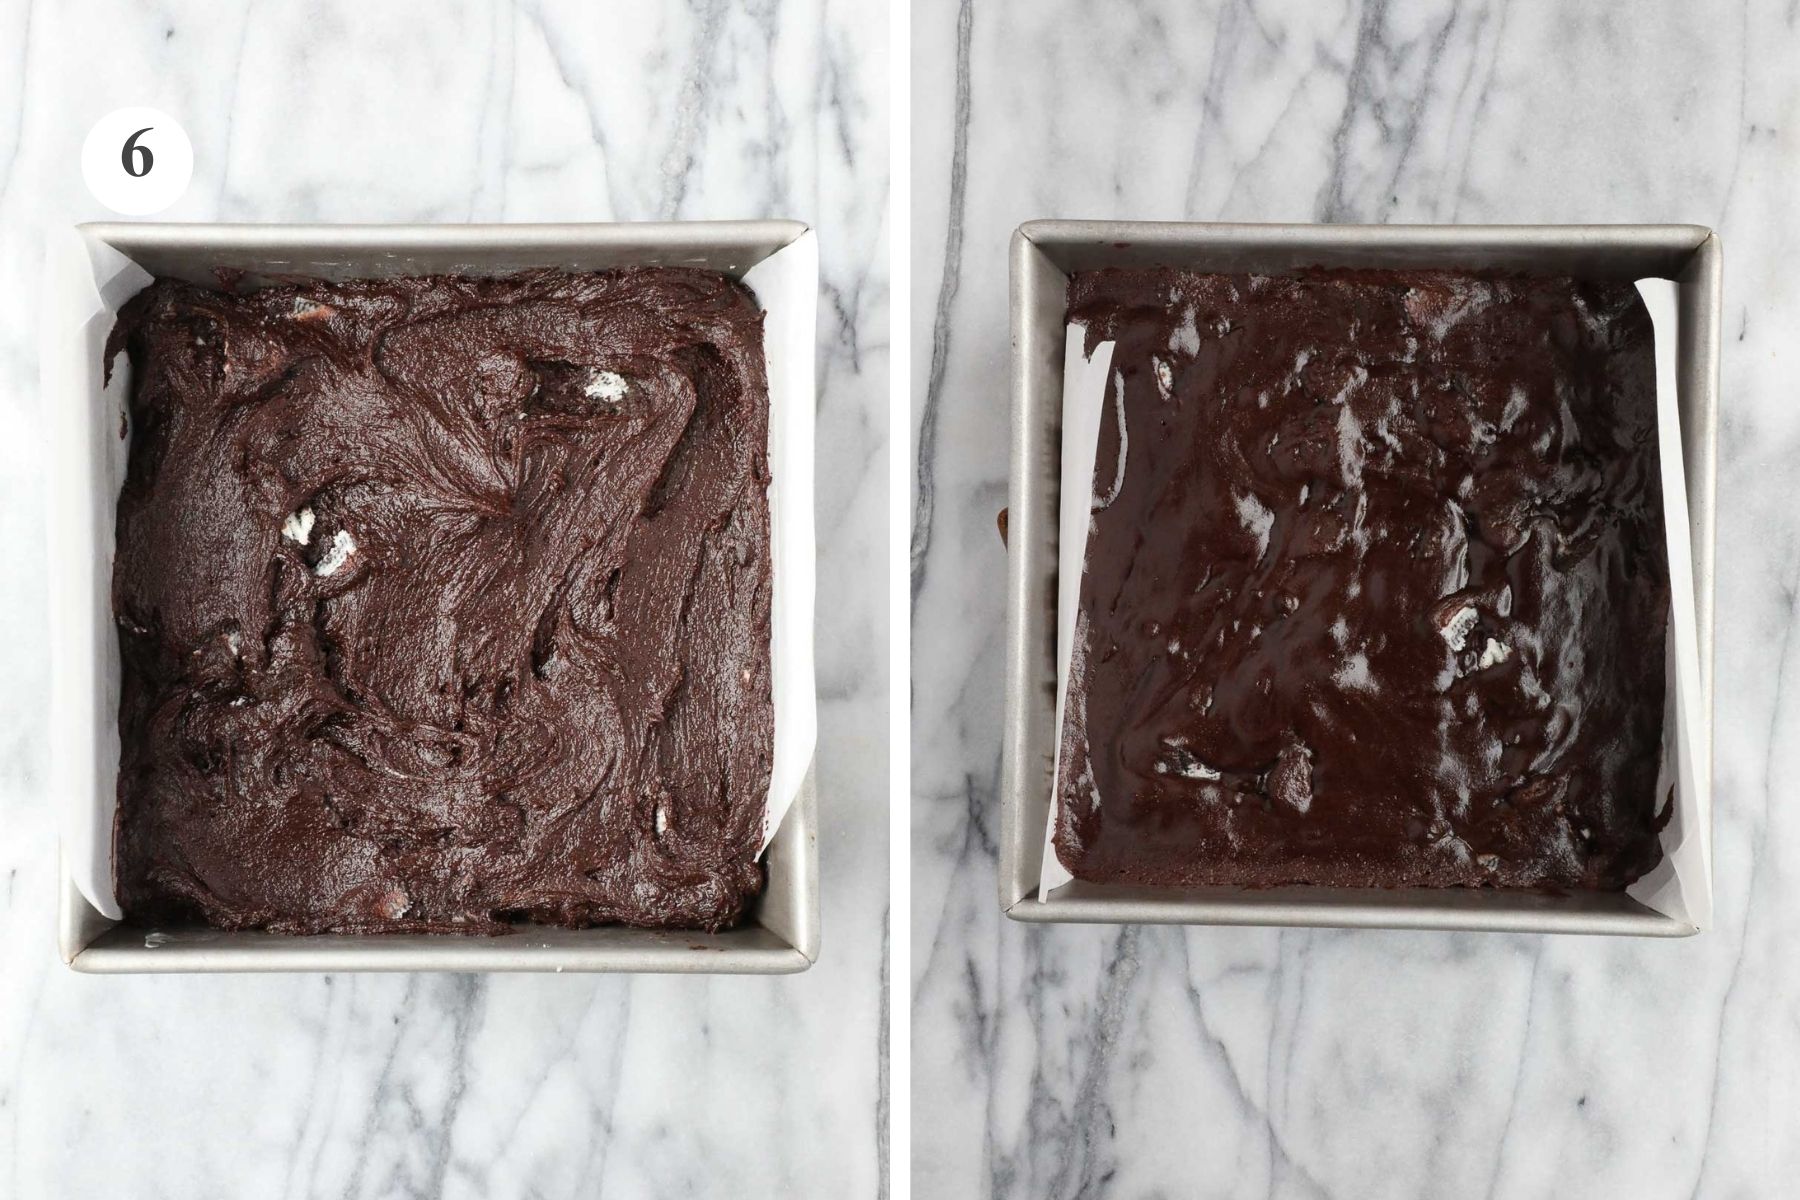 Prepared square baking pan with Oreo Brownie batter, next to image of pan that has been baked for 10 minutes.